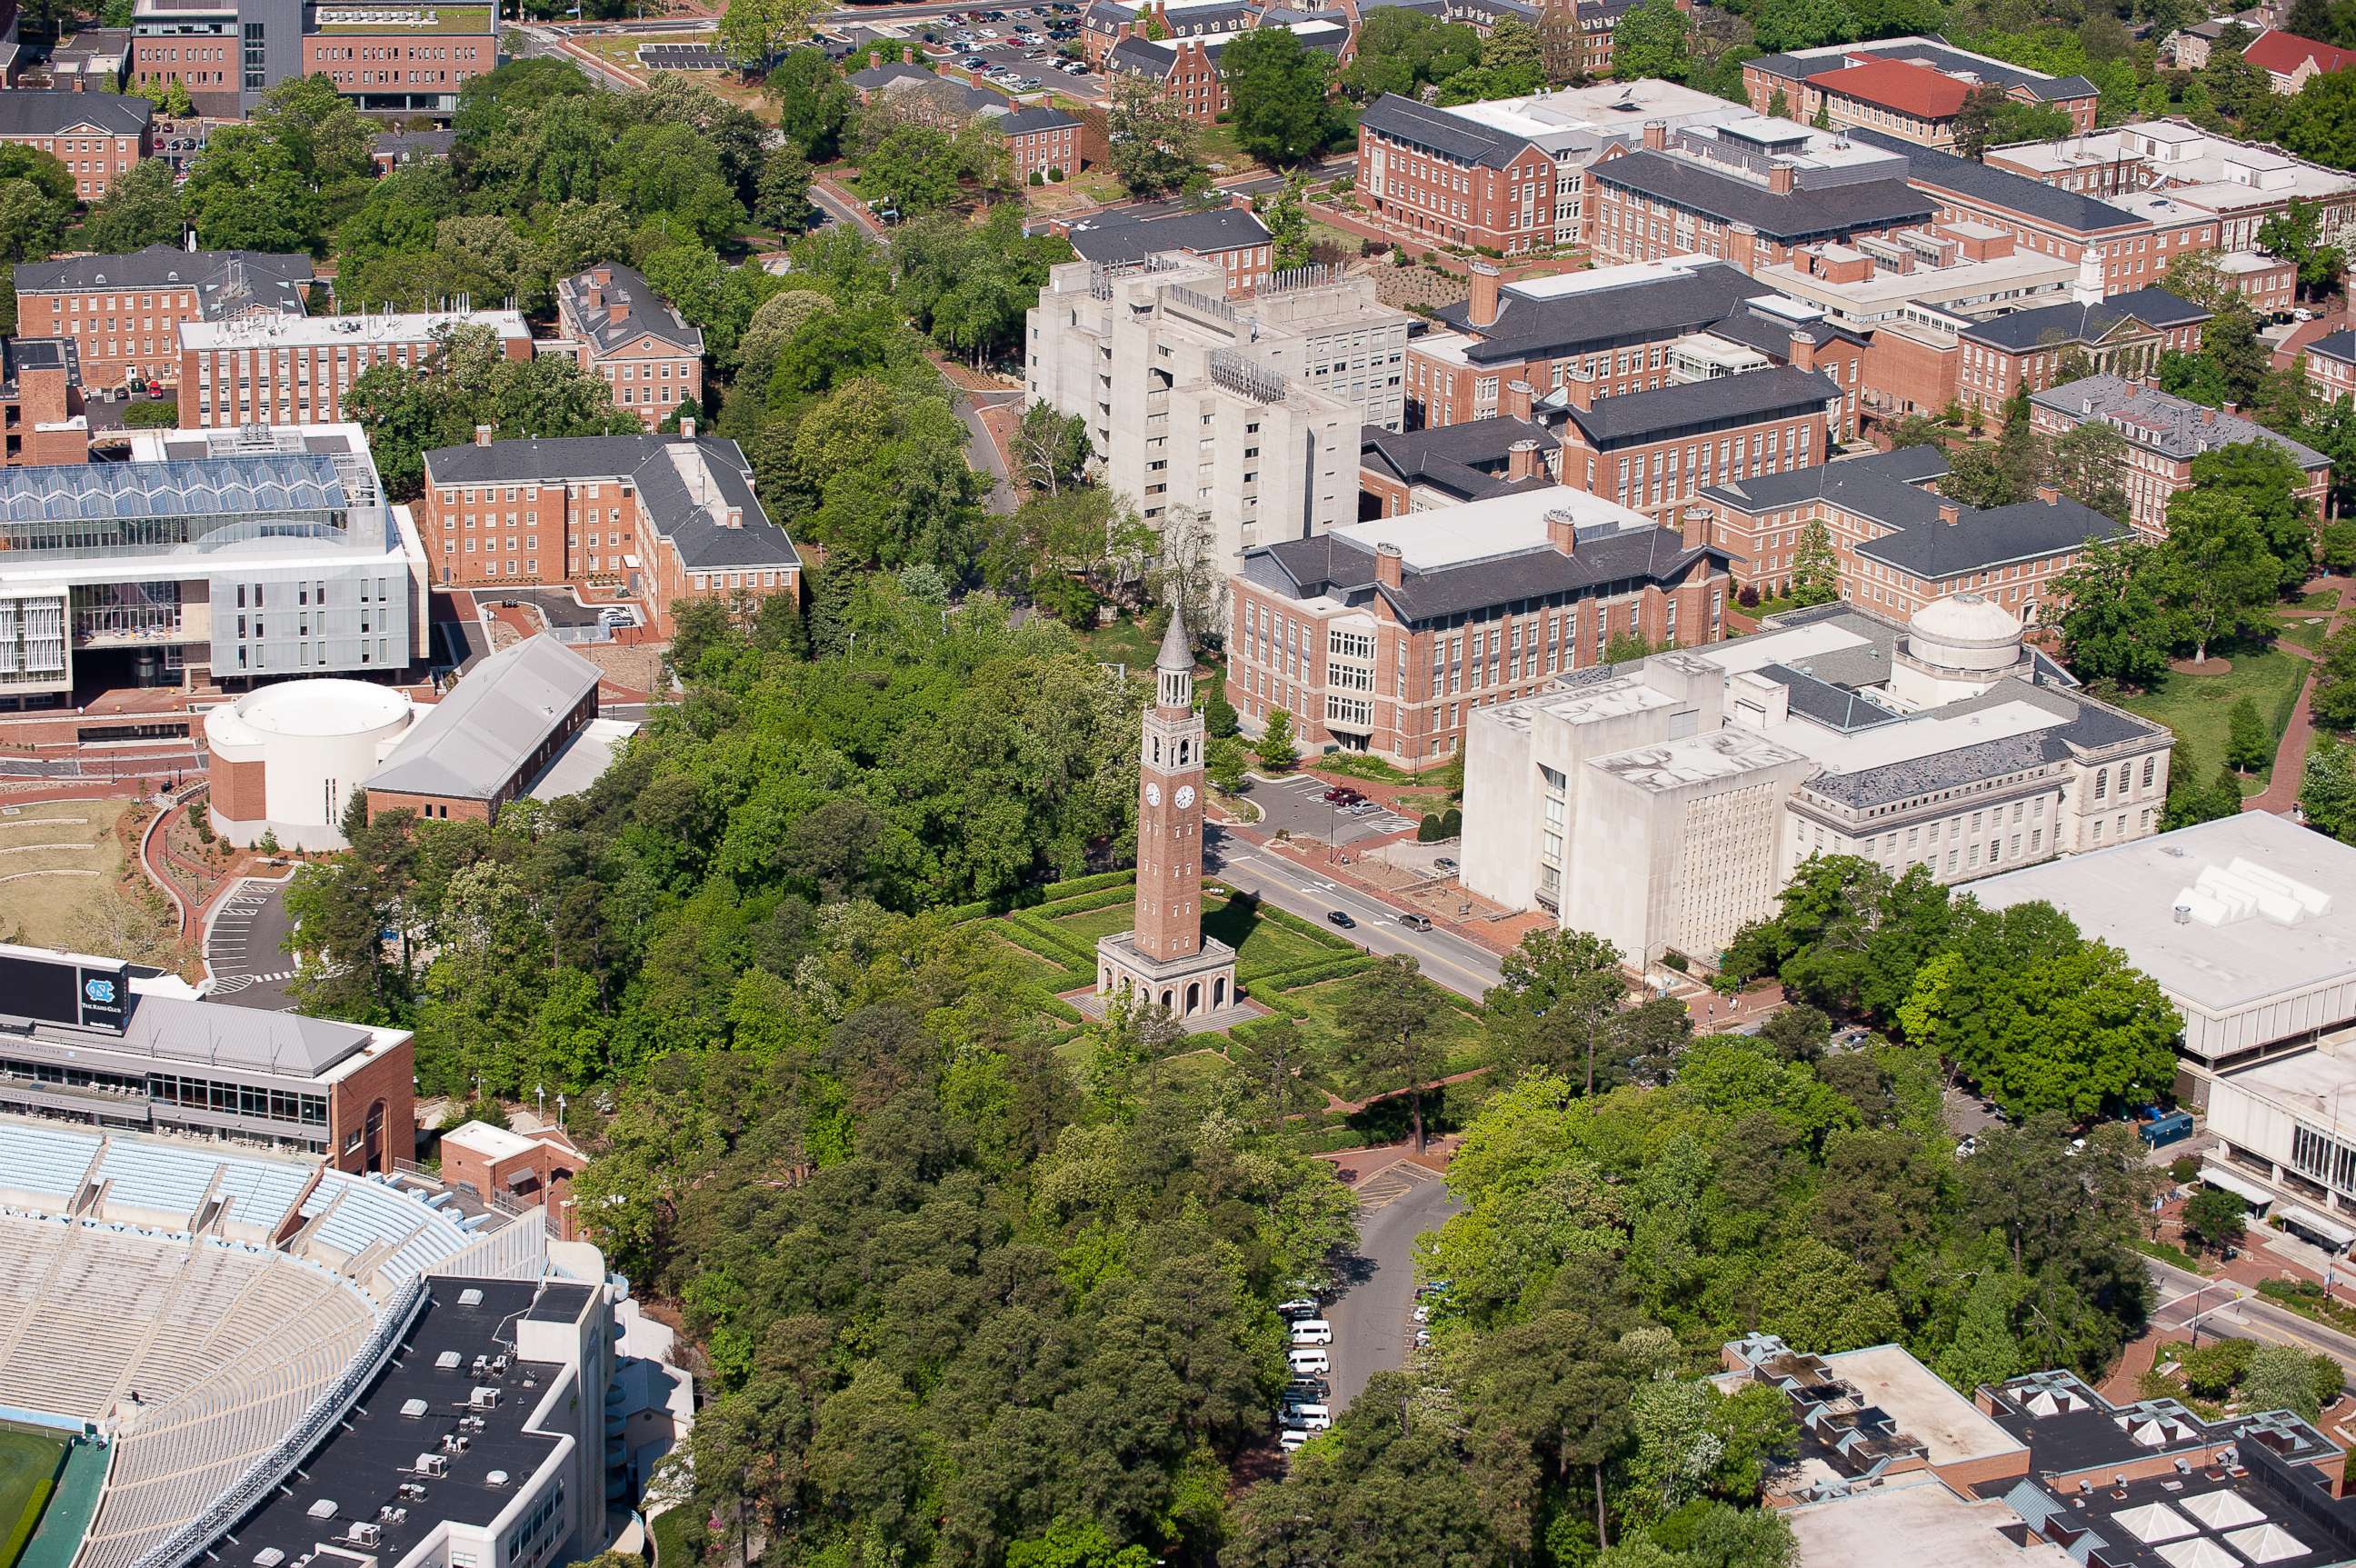 PHOTO: An aerial view of the University of North Carolina campus including the Morehead-Patterson Bell Tower (center) on April 21, 2013 in Chapel Hill, North Carolina.